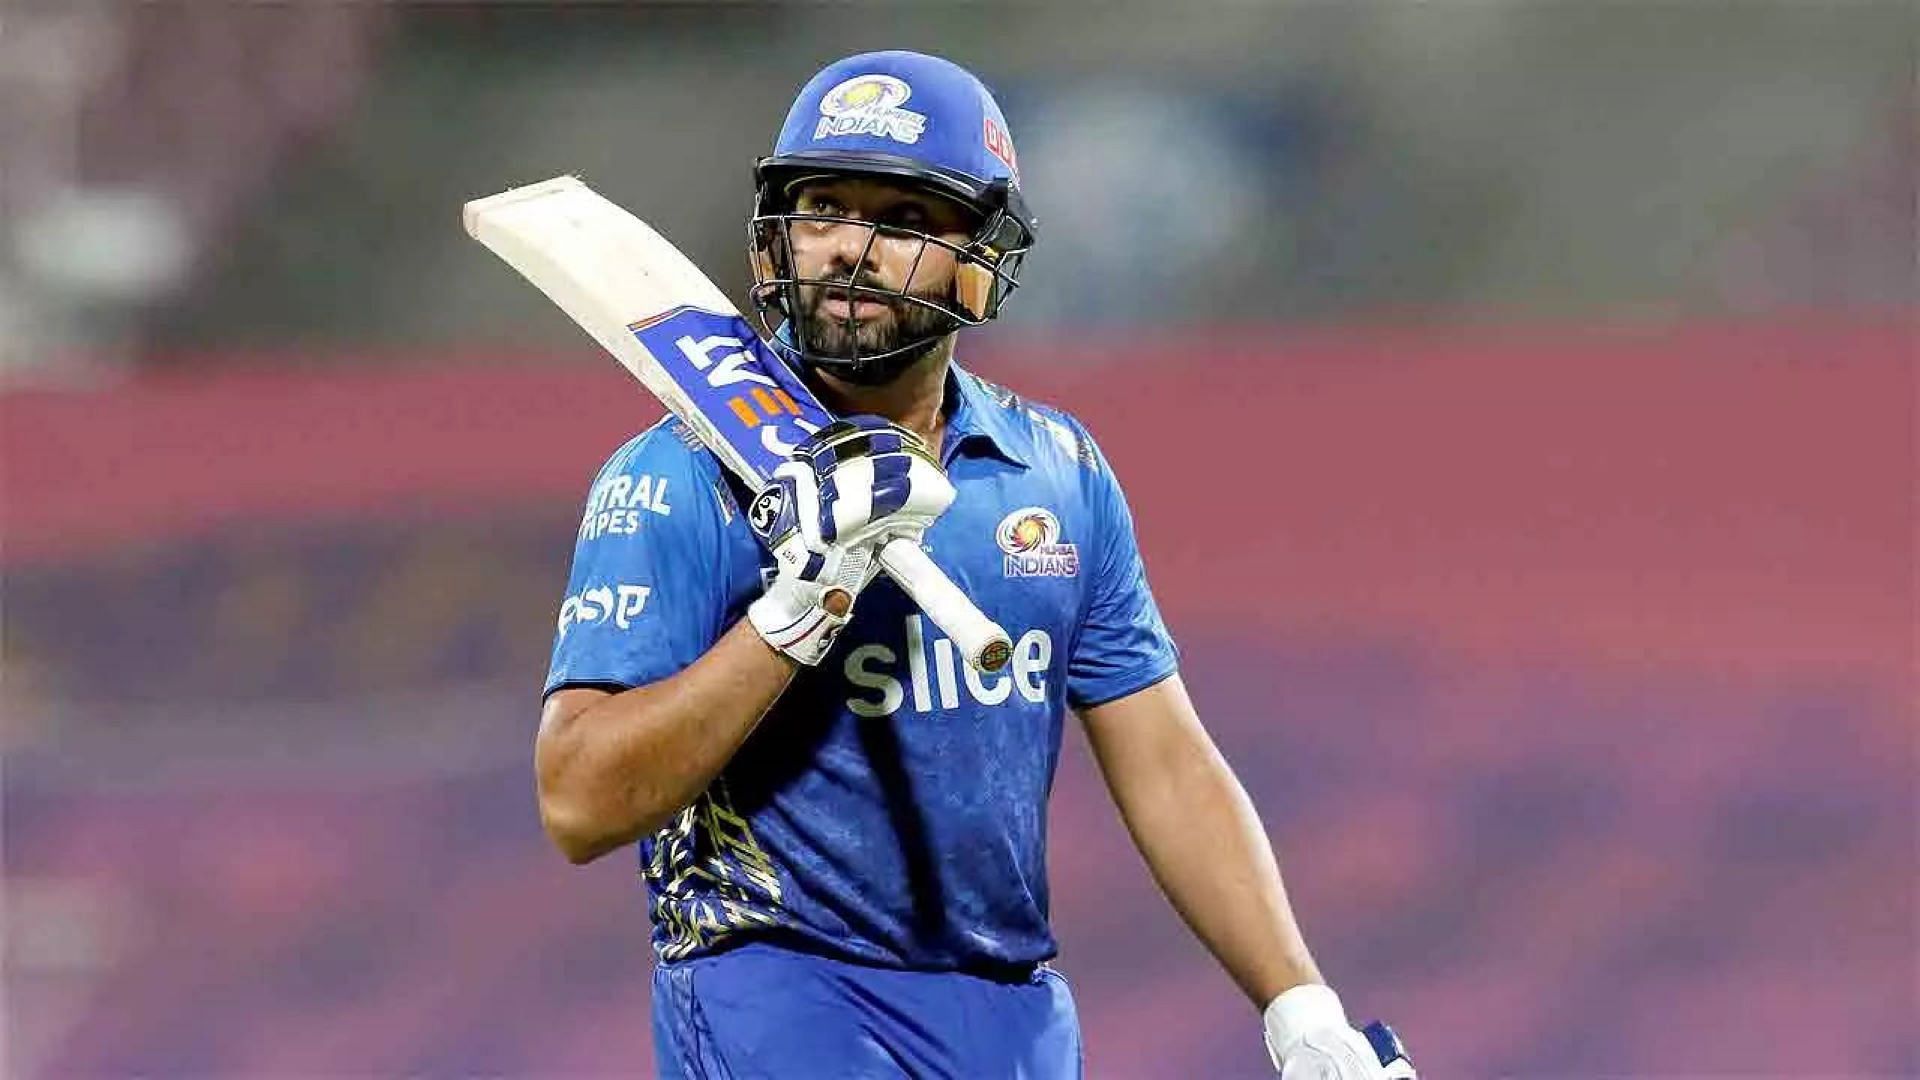 Rohit Sharma has been in poor batting form this season